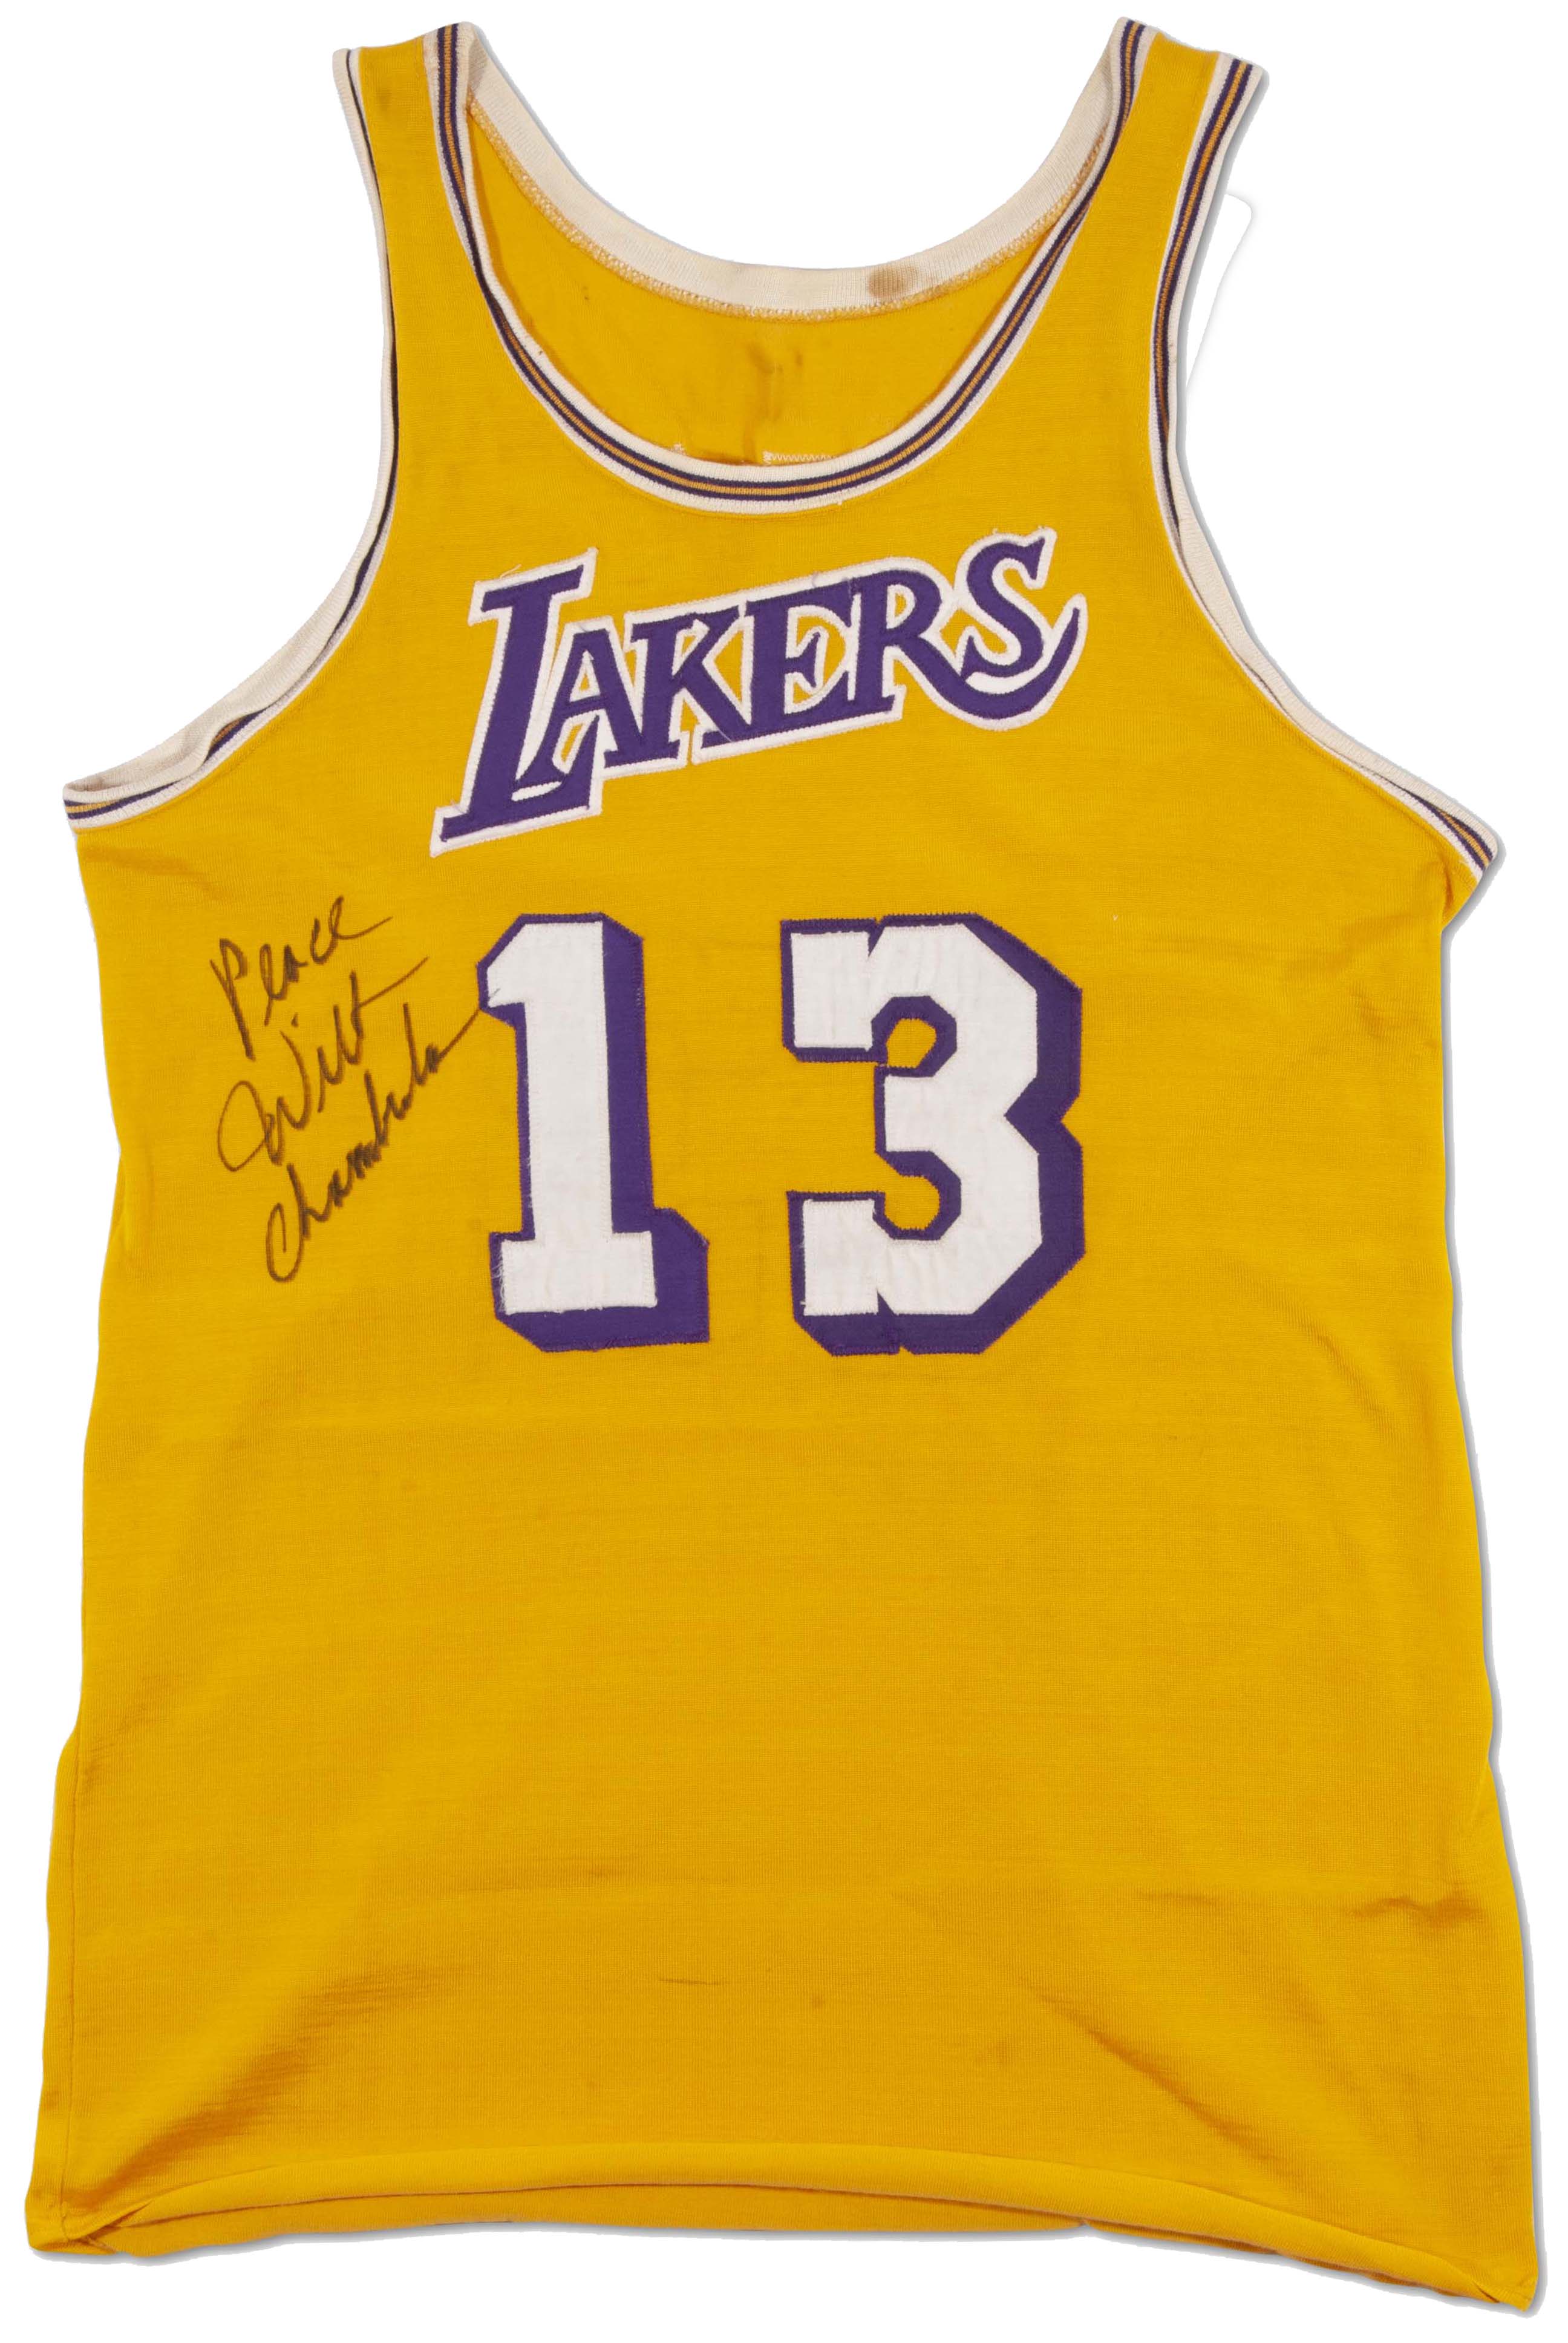 Wilt Chamberlain Rookie Uniform Hits Auction Block, Could Sell For